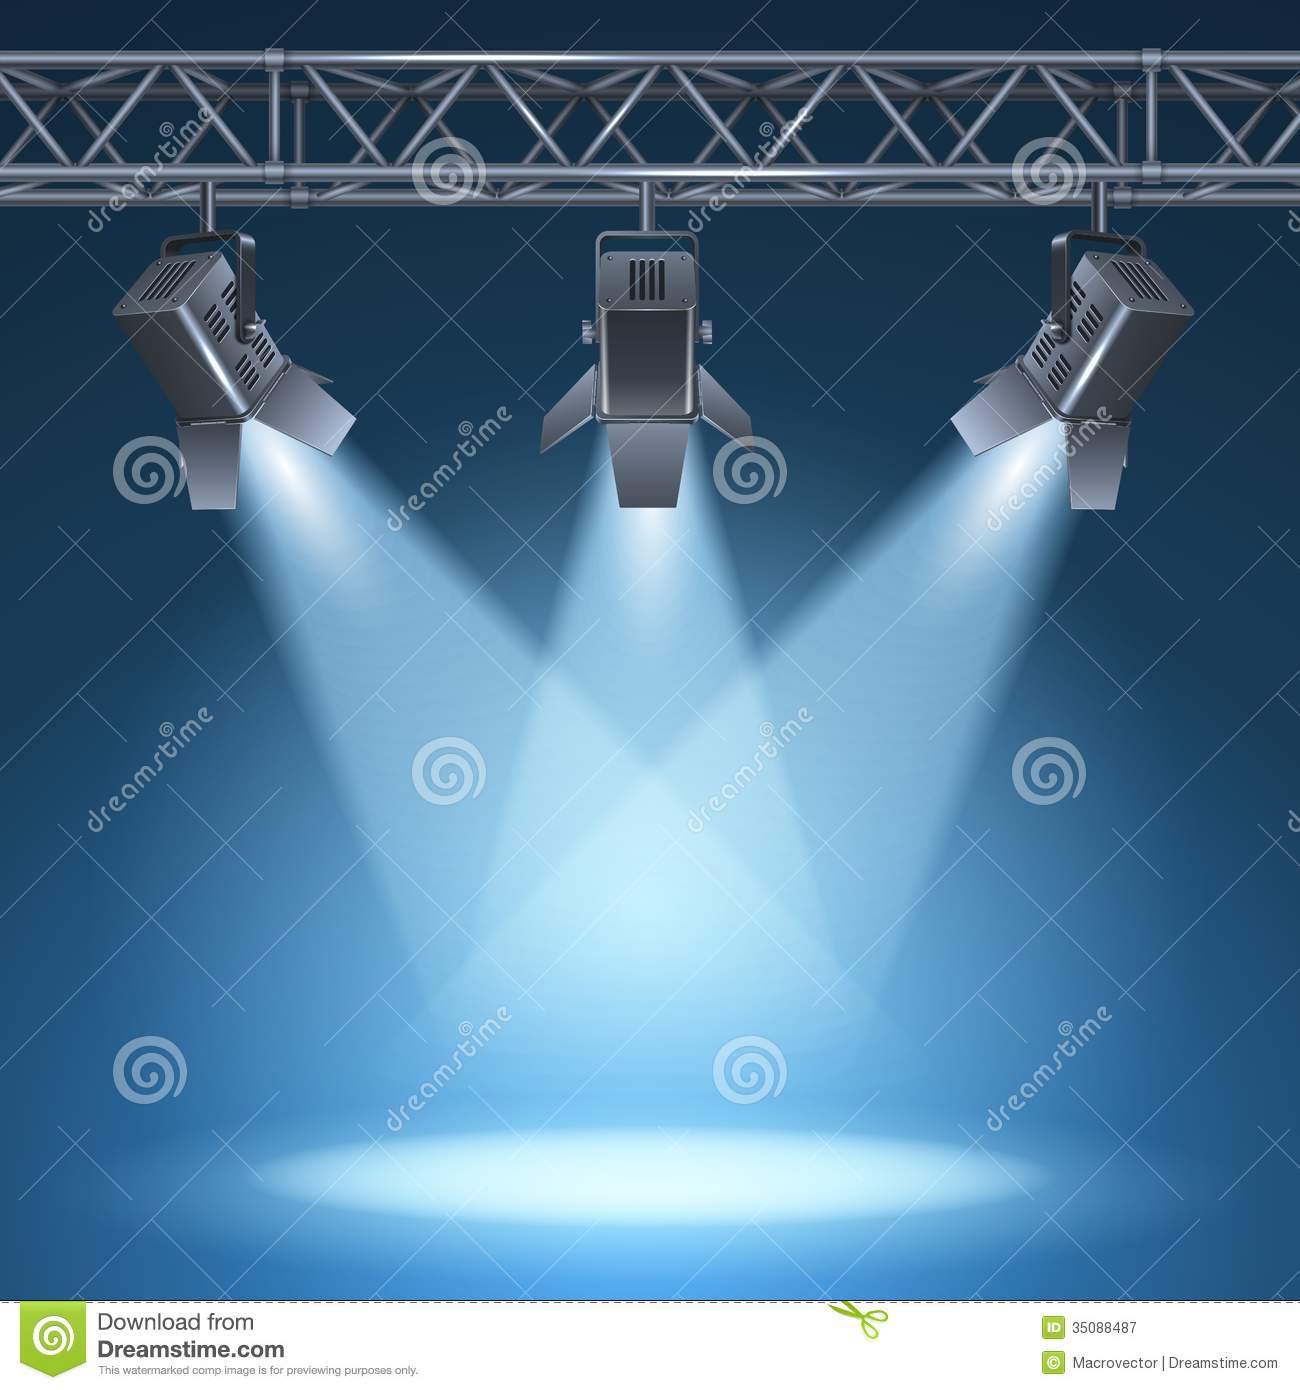 Stage With Lights Royalty Free Stock Photography   Image  35088487